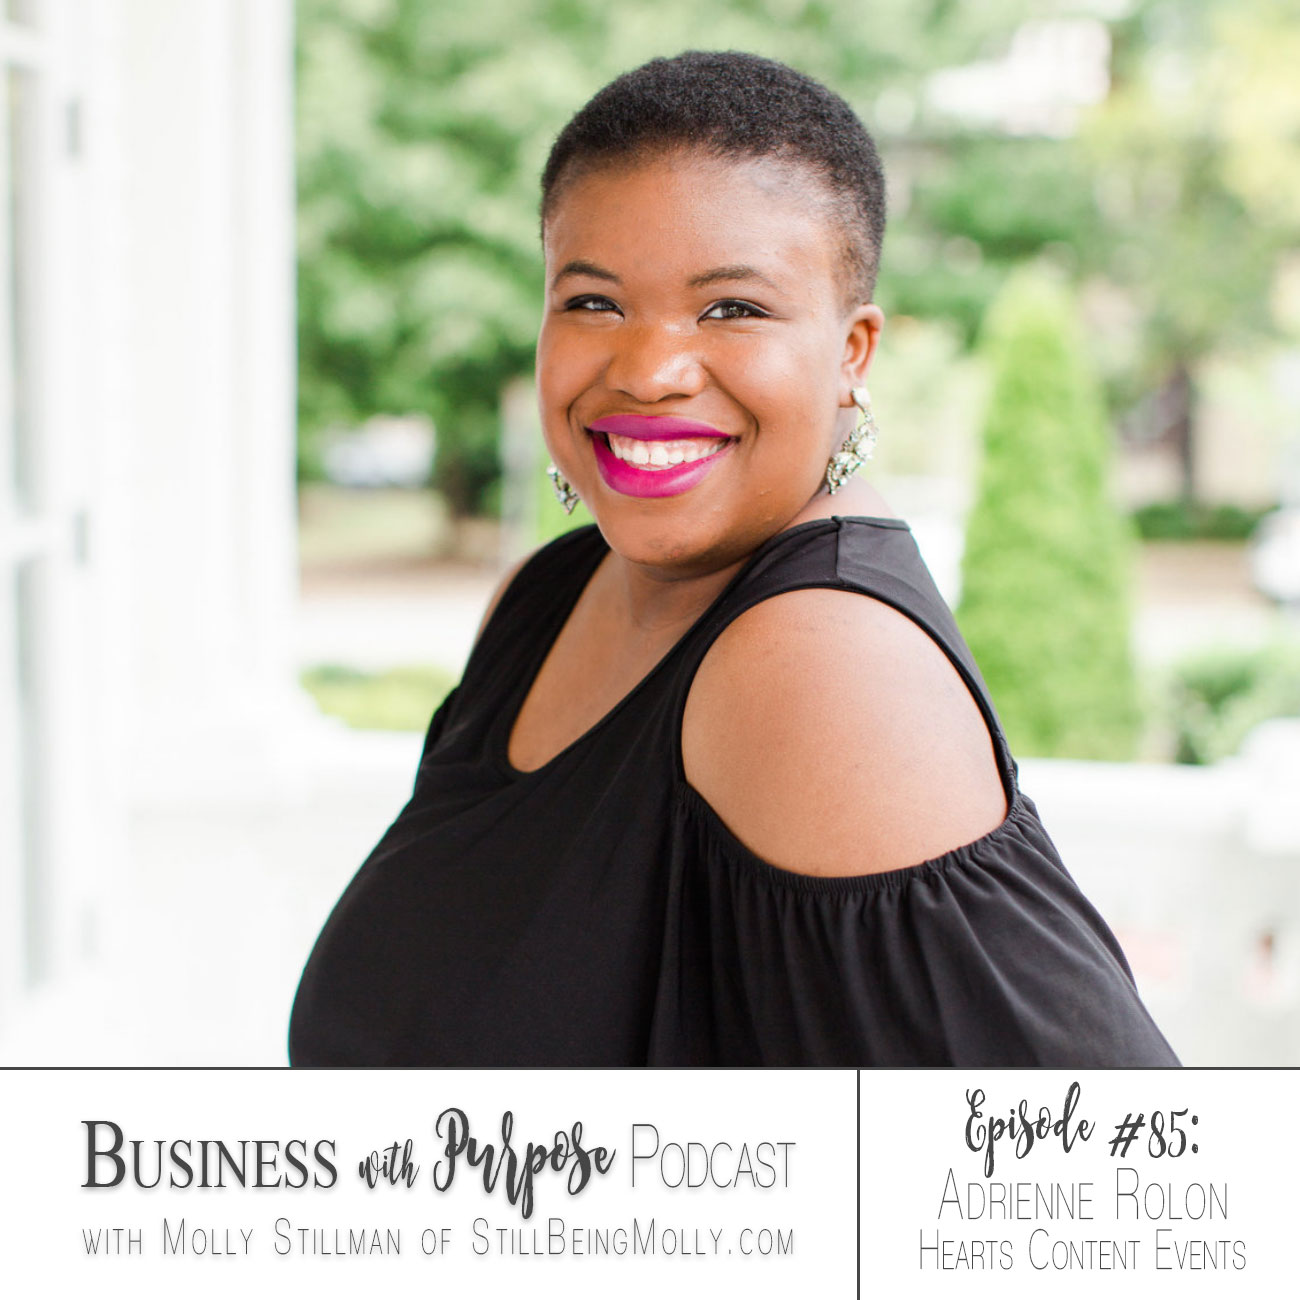 Business with Purpose Podcast EP 85: Adrienne Rolon, Hearts Content Events & Design featured by popular North Carolina blogger and podcaster, Still Being Molly